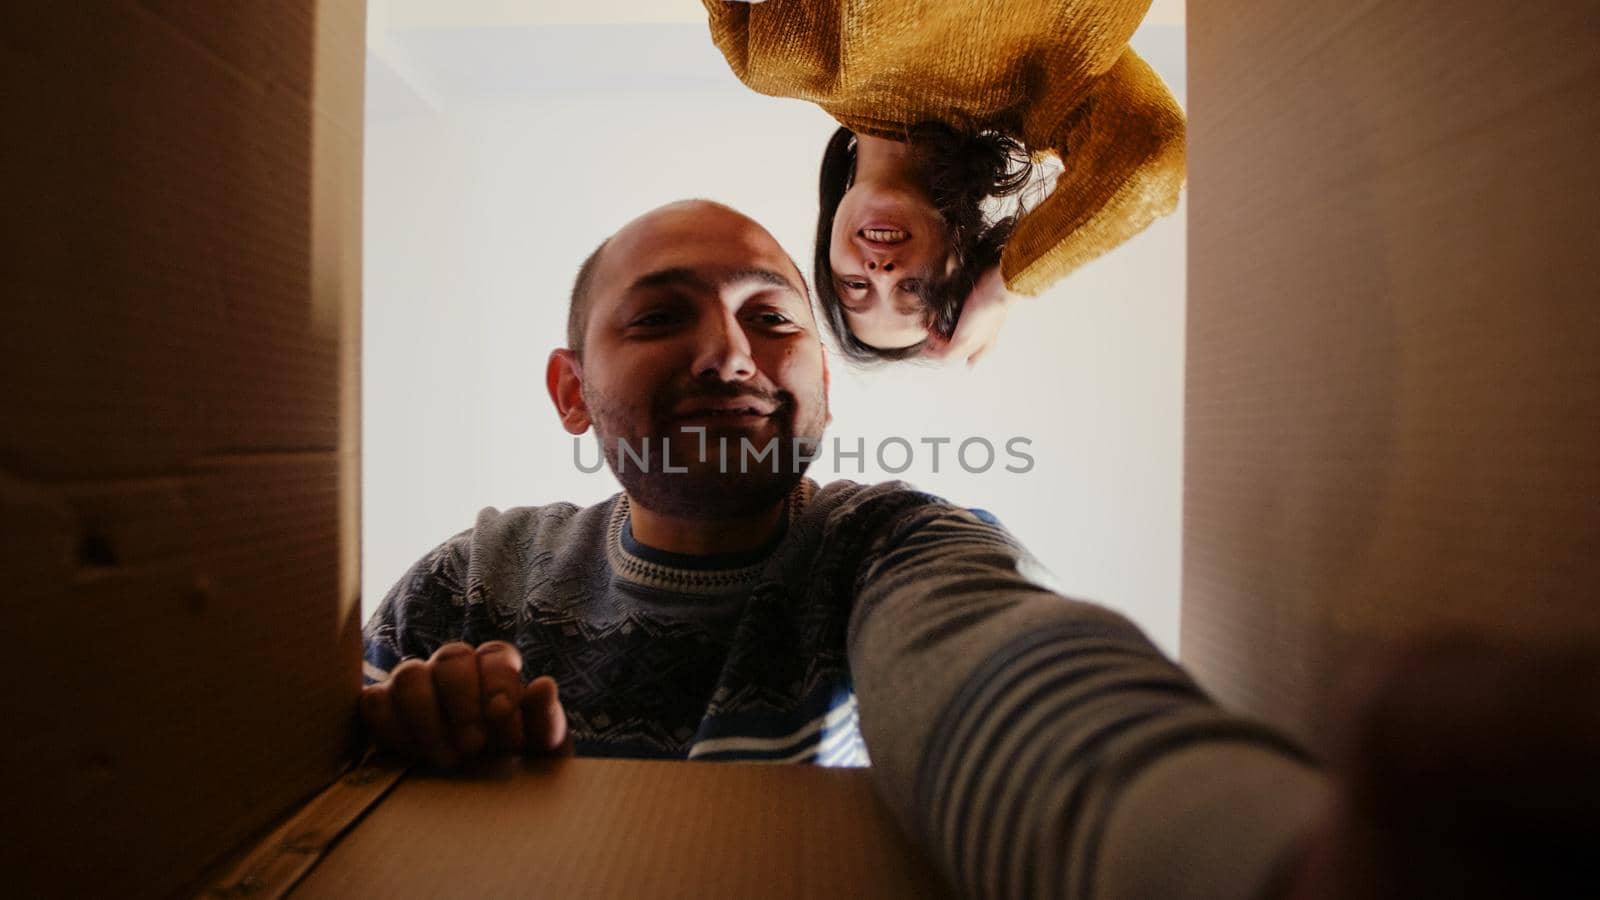 POV of festive couple taking out christmas decorations from box for holiday celebration. People opening package with ornaments and garlands preparing for seasonal winter festivity.